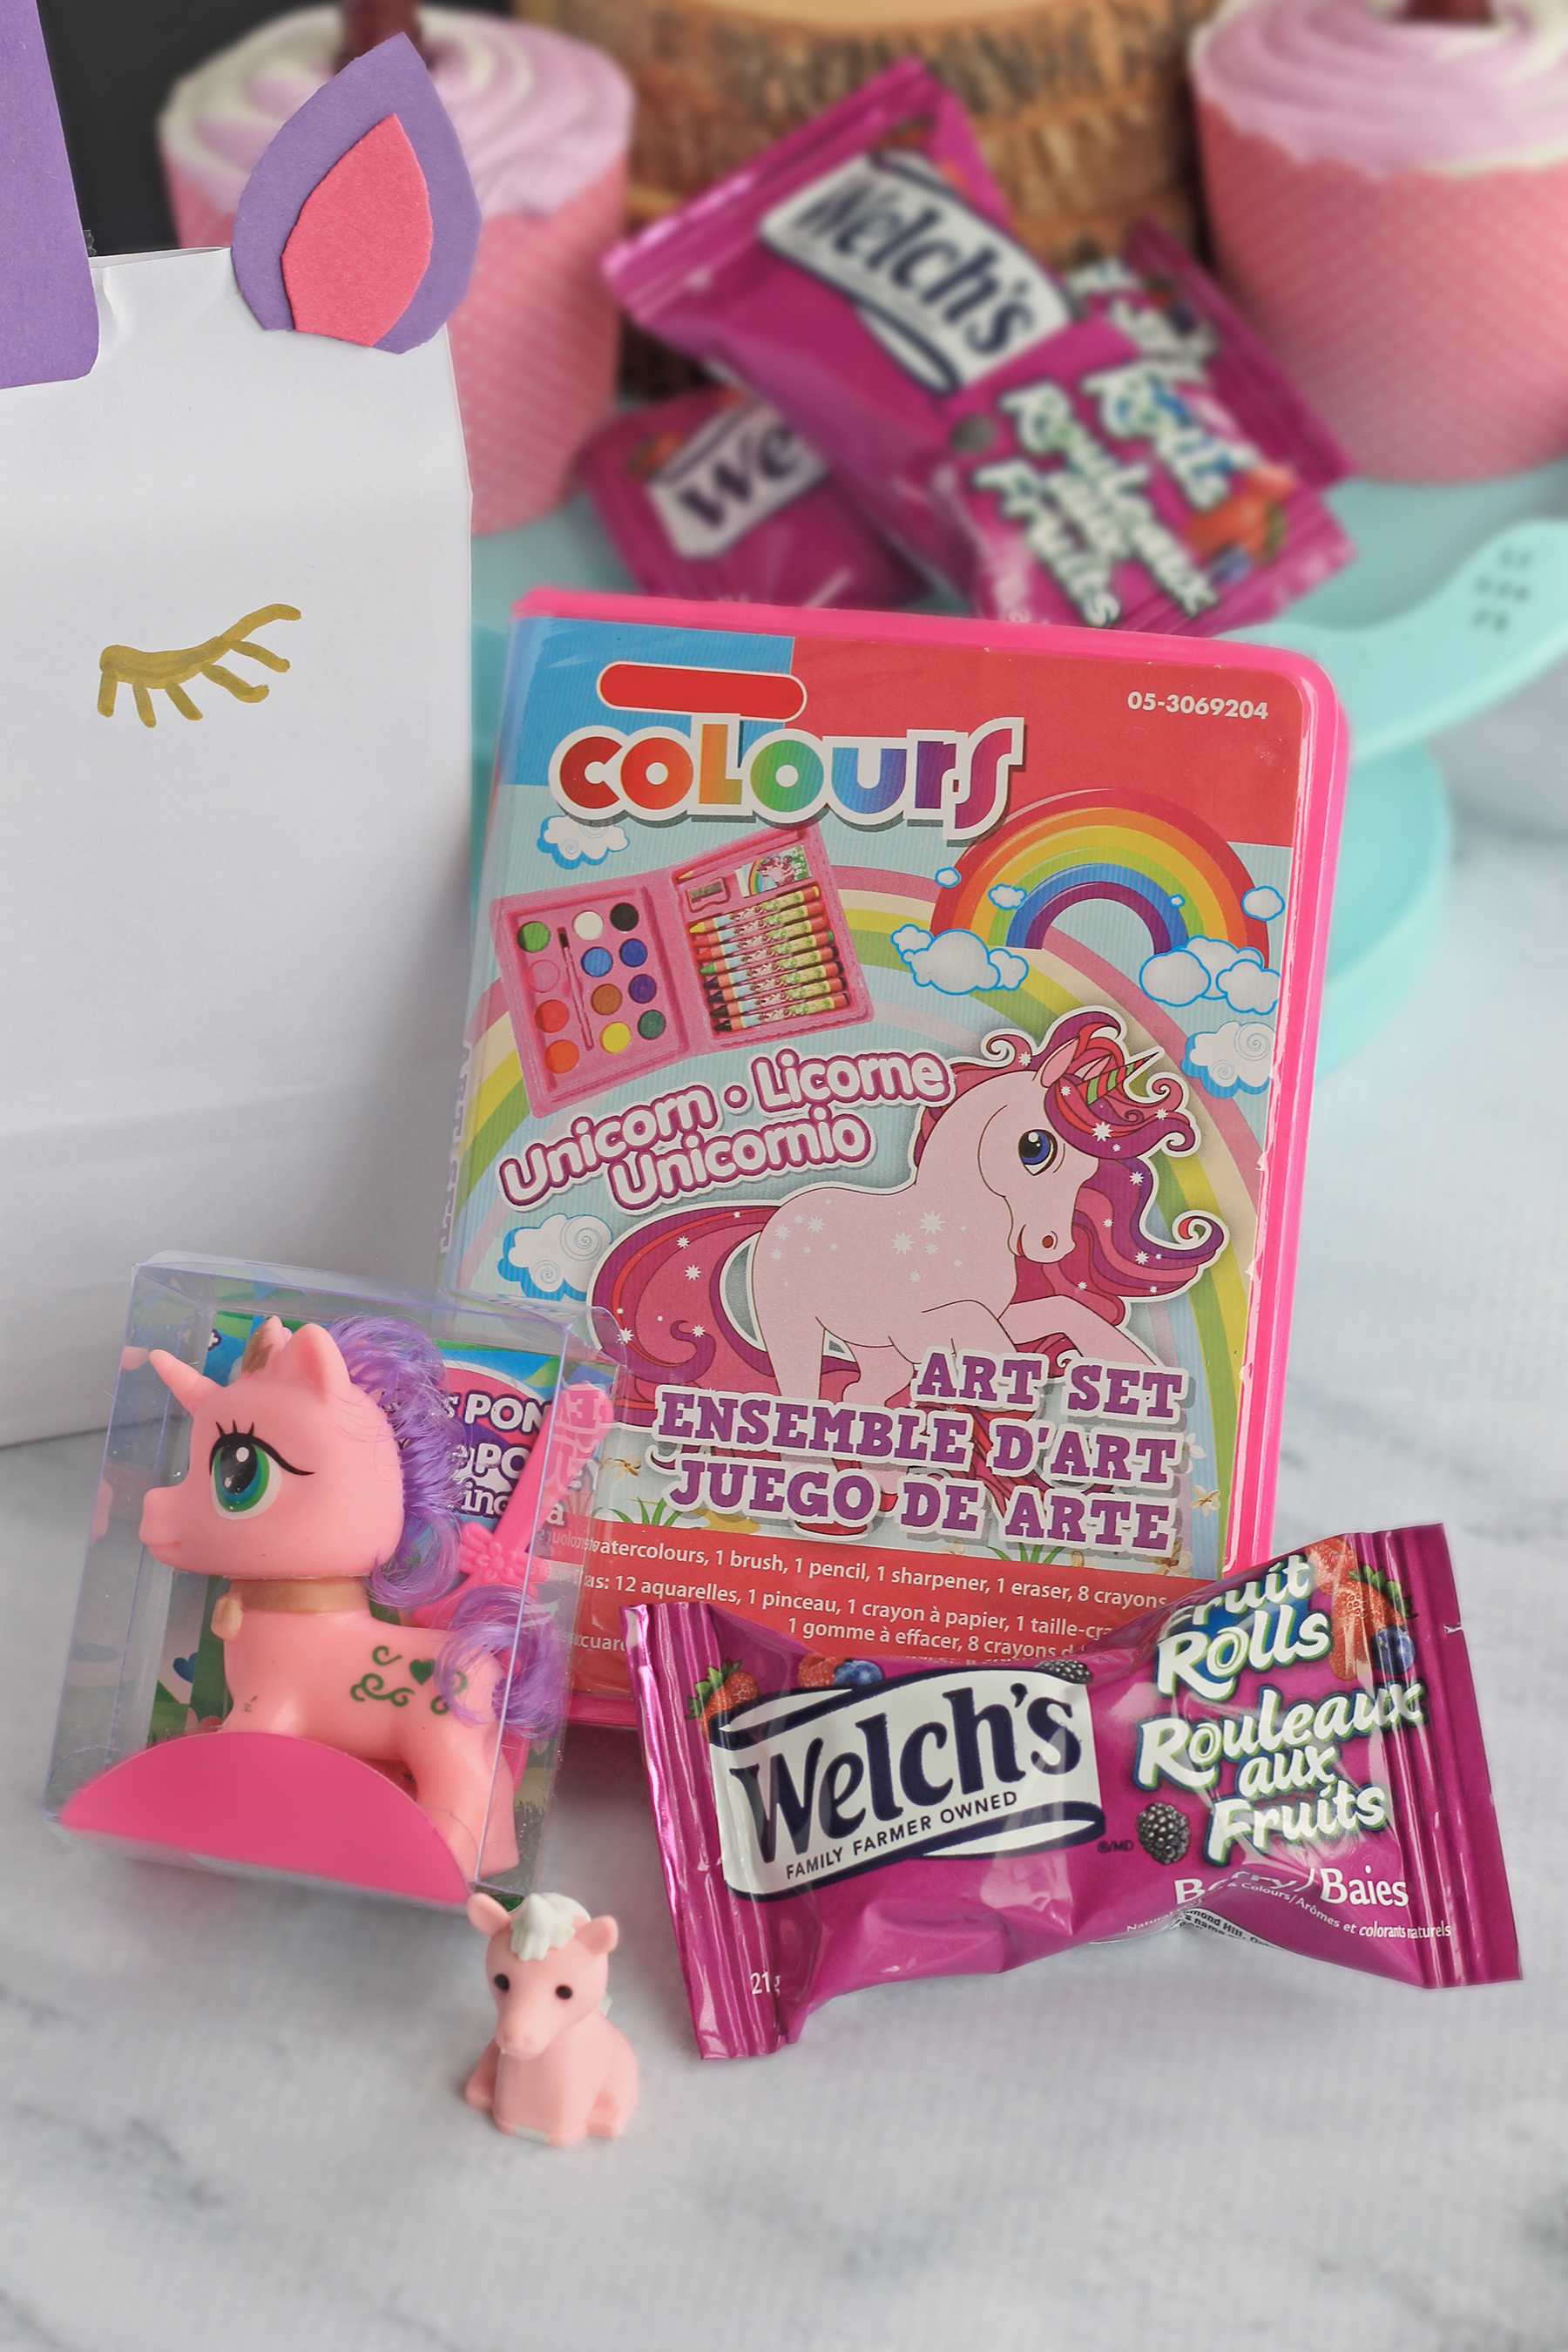 Unicorn Birthday Party With Welch’s Fruit Rolls